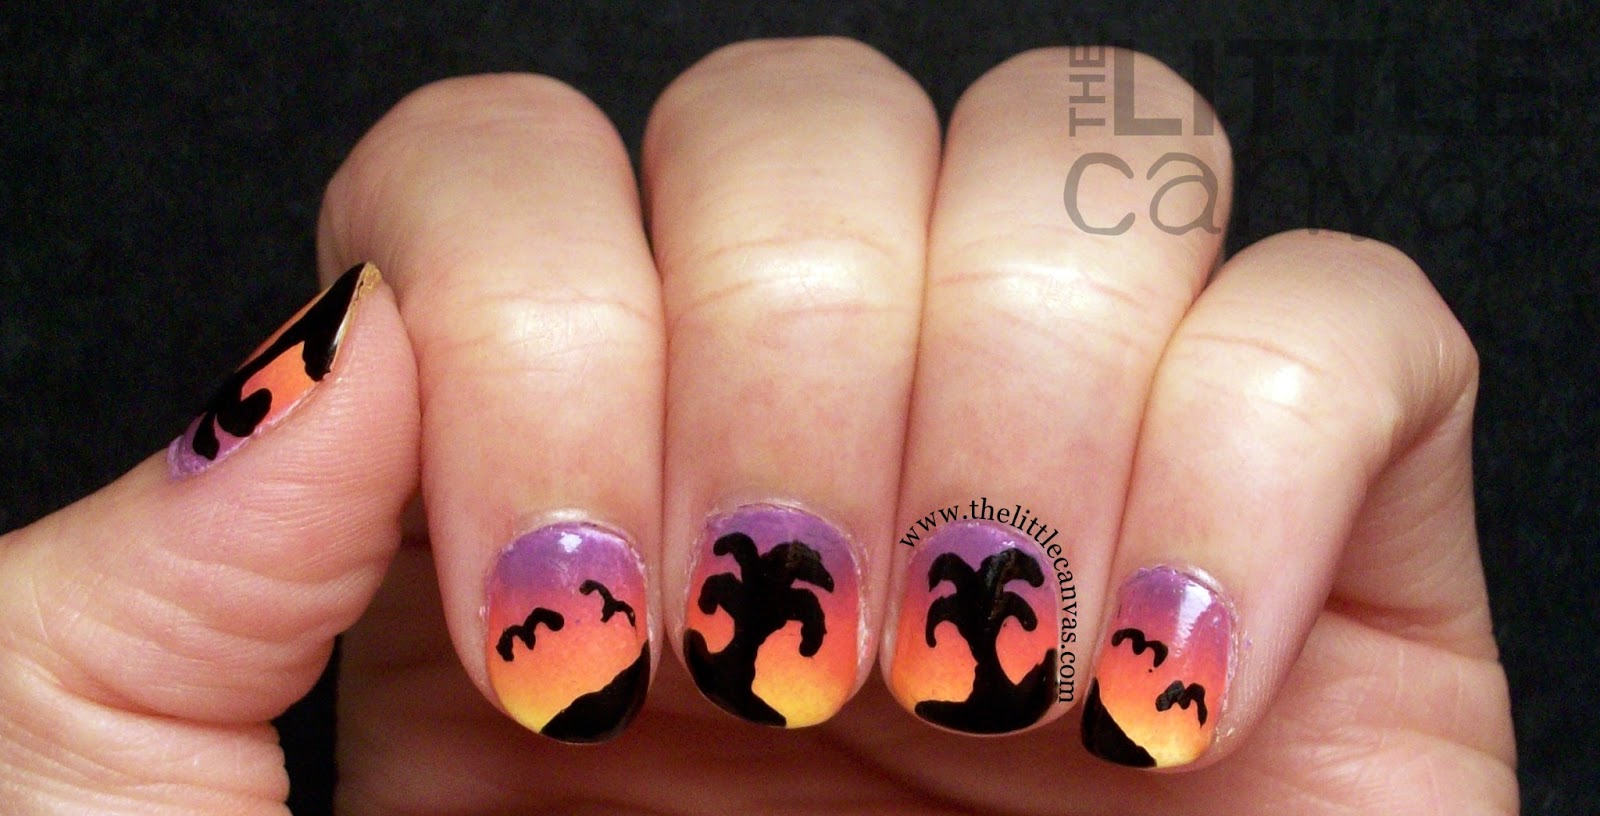 3. Tropical Palm Tree Nails - wide 9